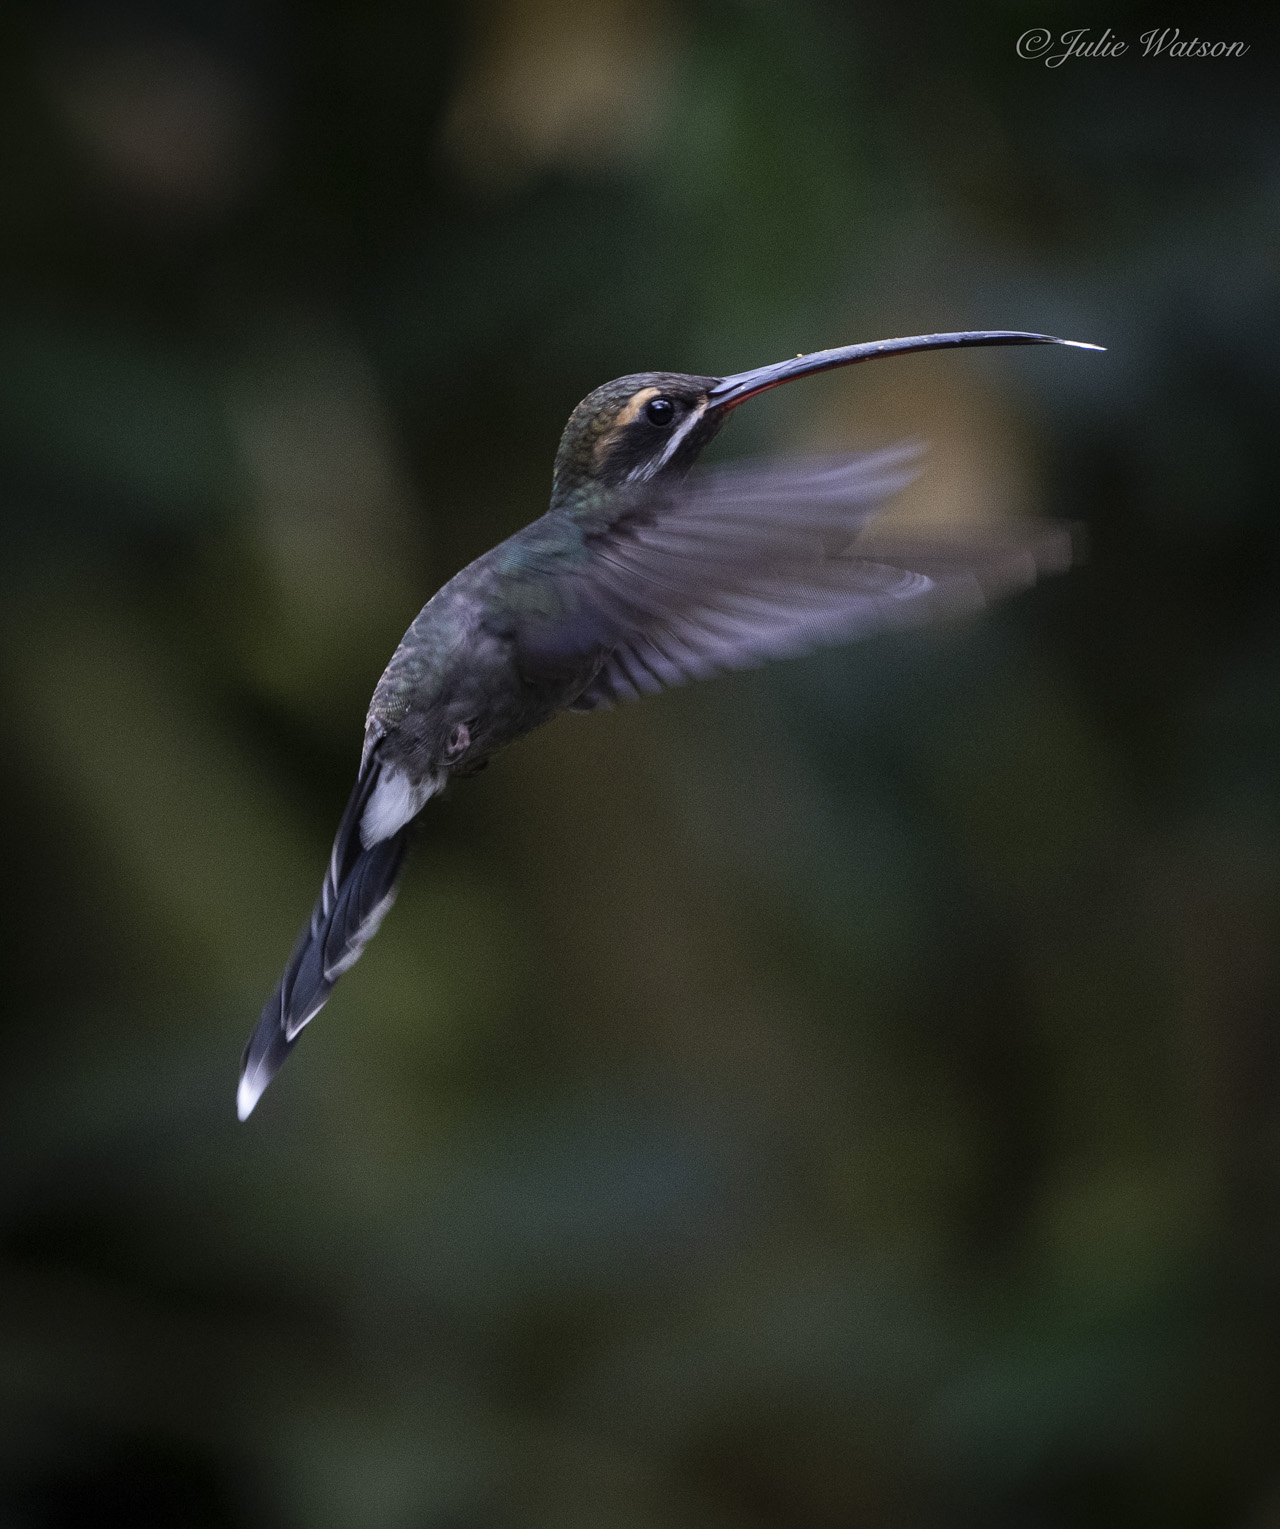 In the Andean Choco cloud forest in Ecuador, I have counted more than 30 species of hummingbirds.